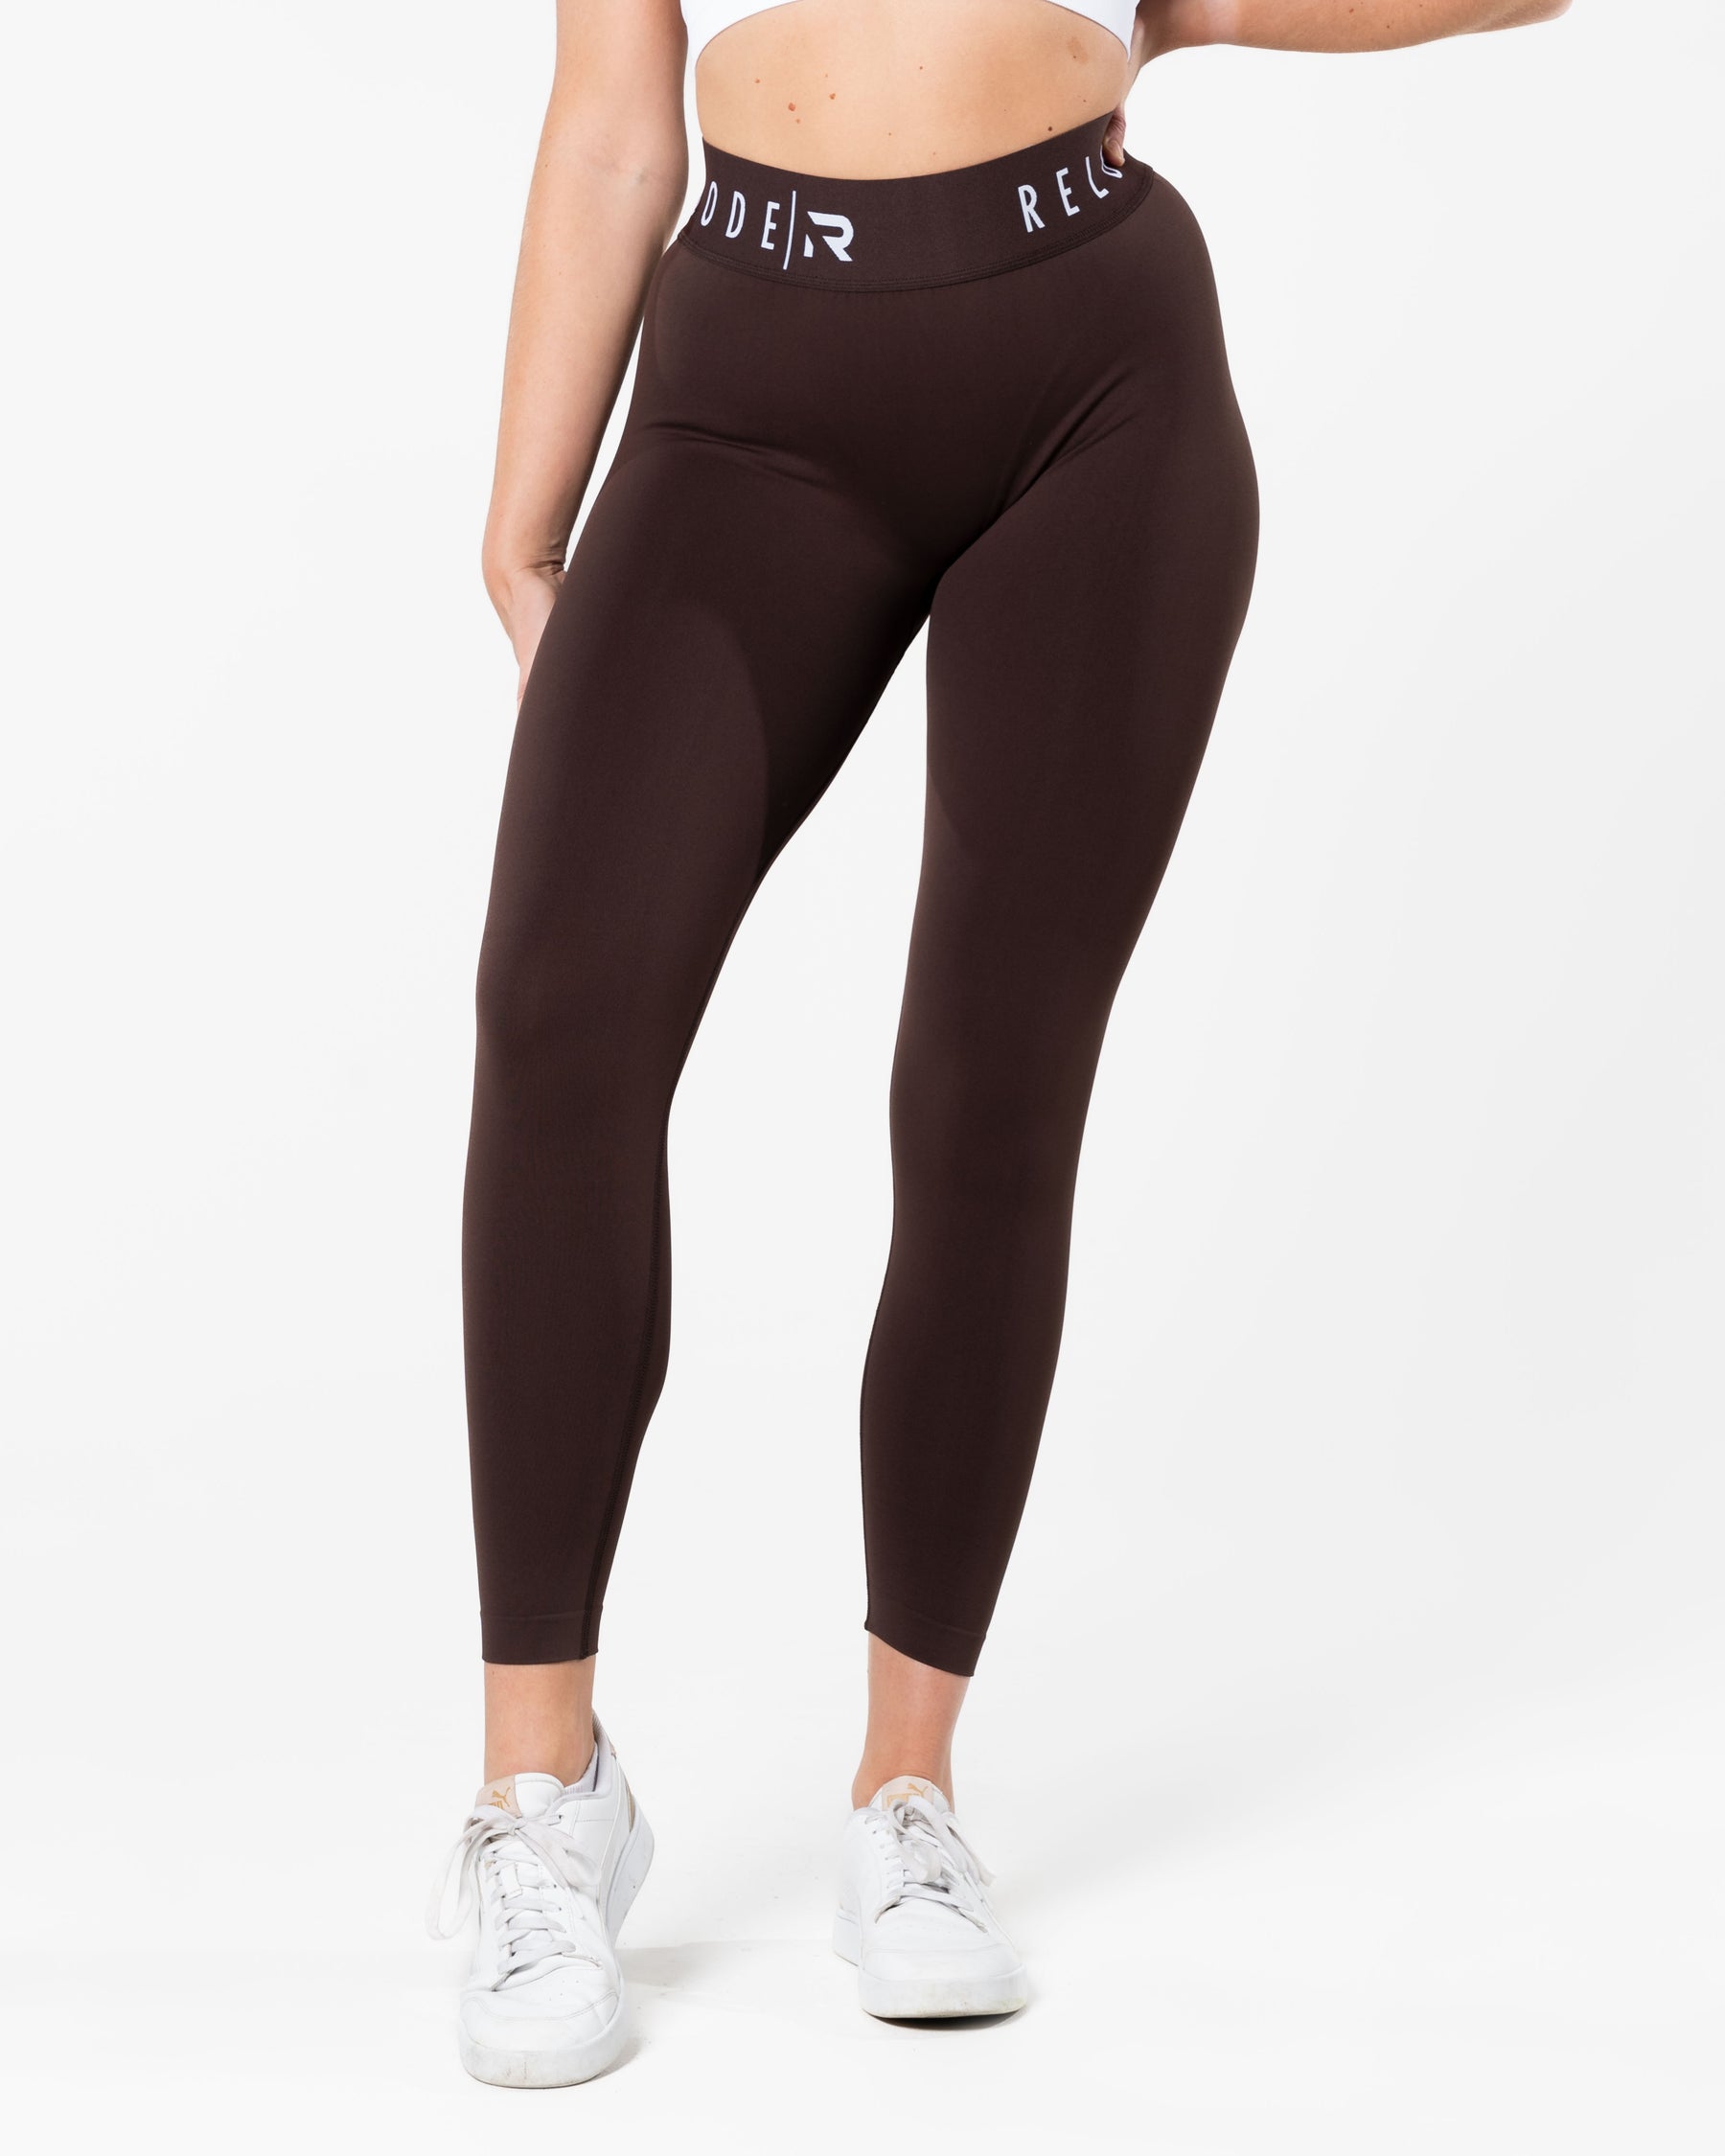 Apex Seamless Tights - Brown